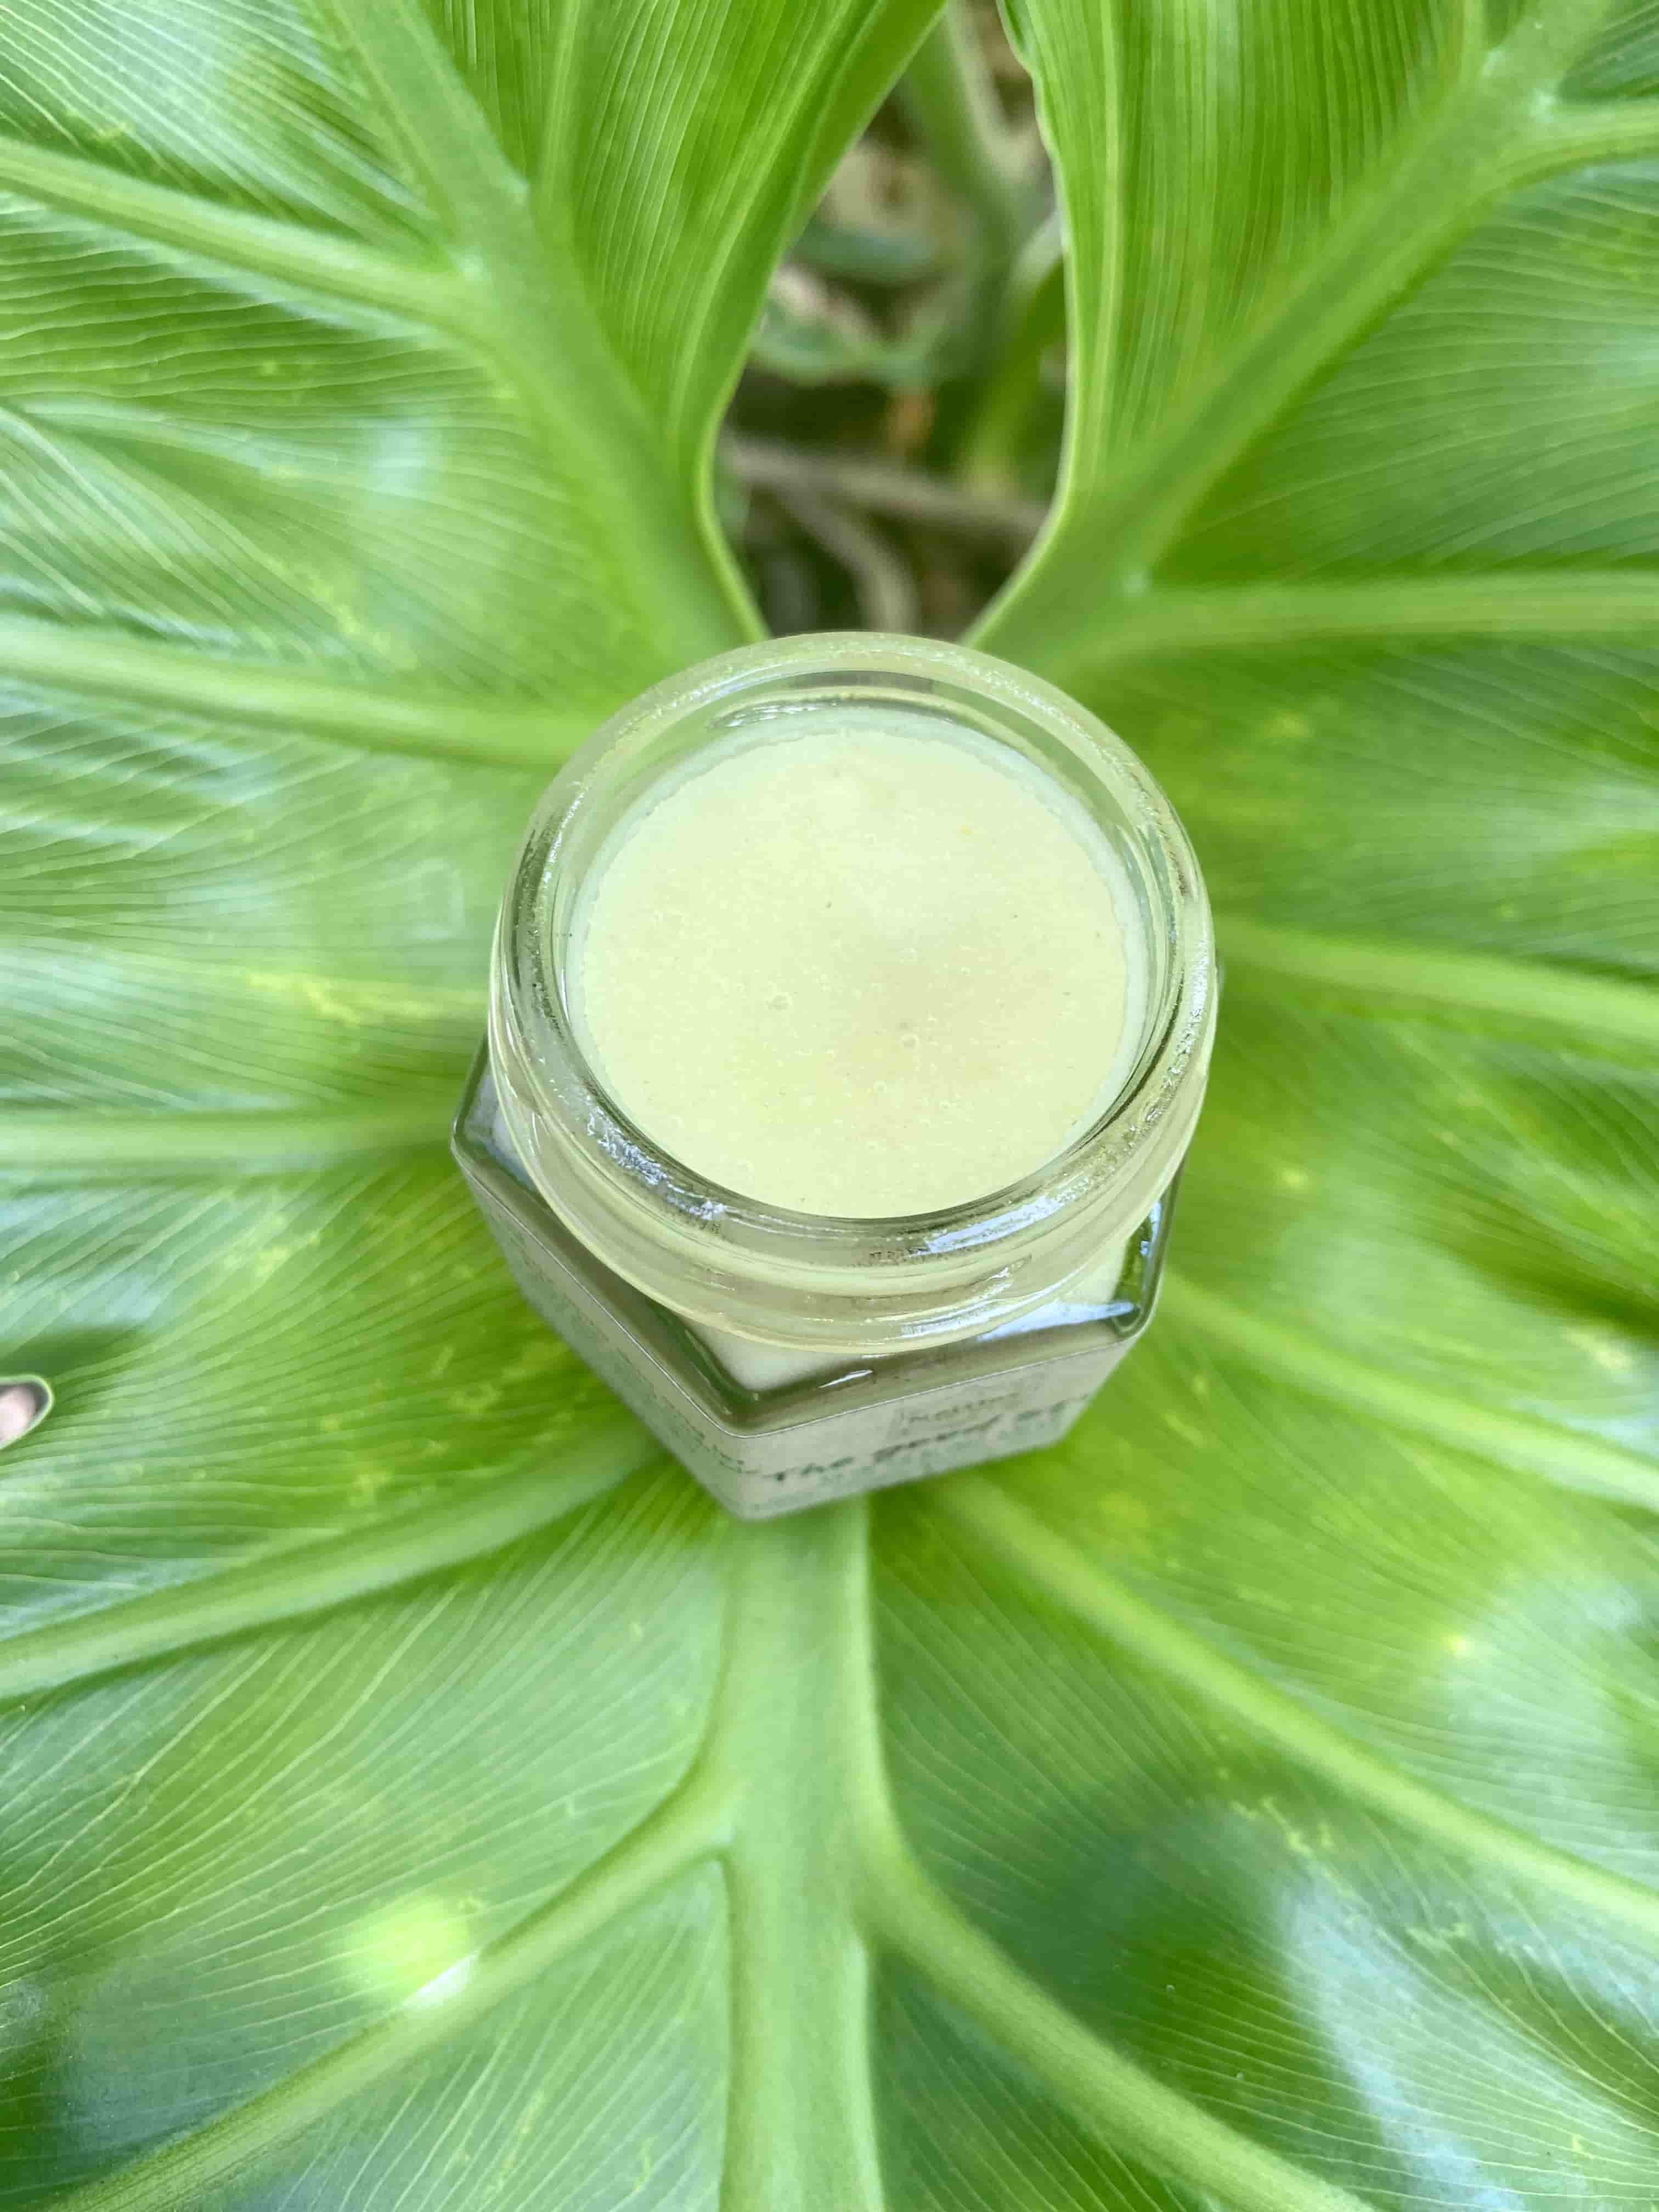 Healing skin salve made with spiderwort infused sunflower oil, organic beeswax, raw shea butter, & lavender essential oil, ideal for bites, stings, burns and skin irritations in general. Formulated with pure, simple ingredients and freshly created in small batches in Jacksonville, FL.